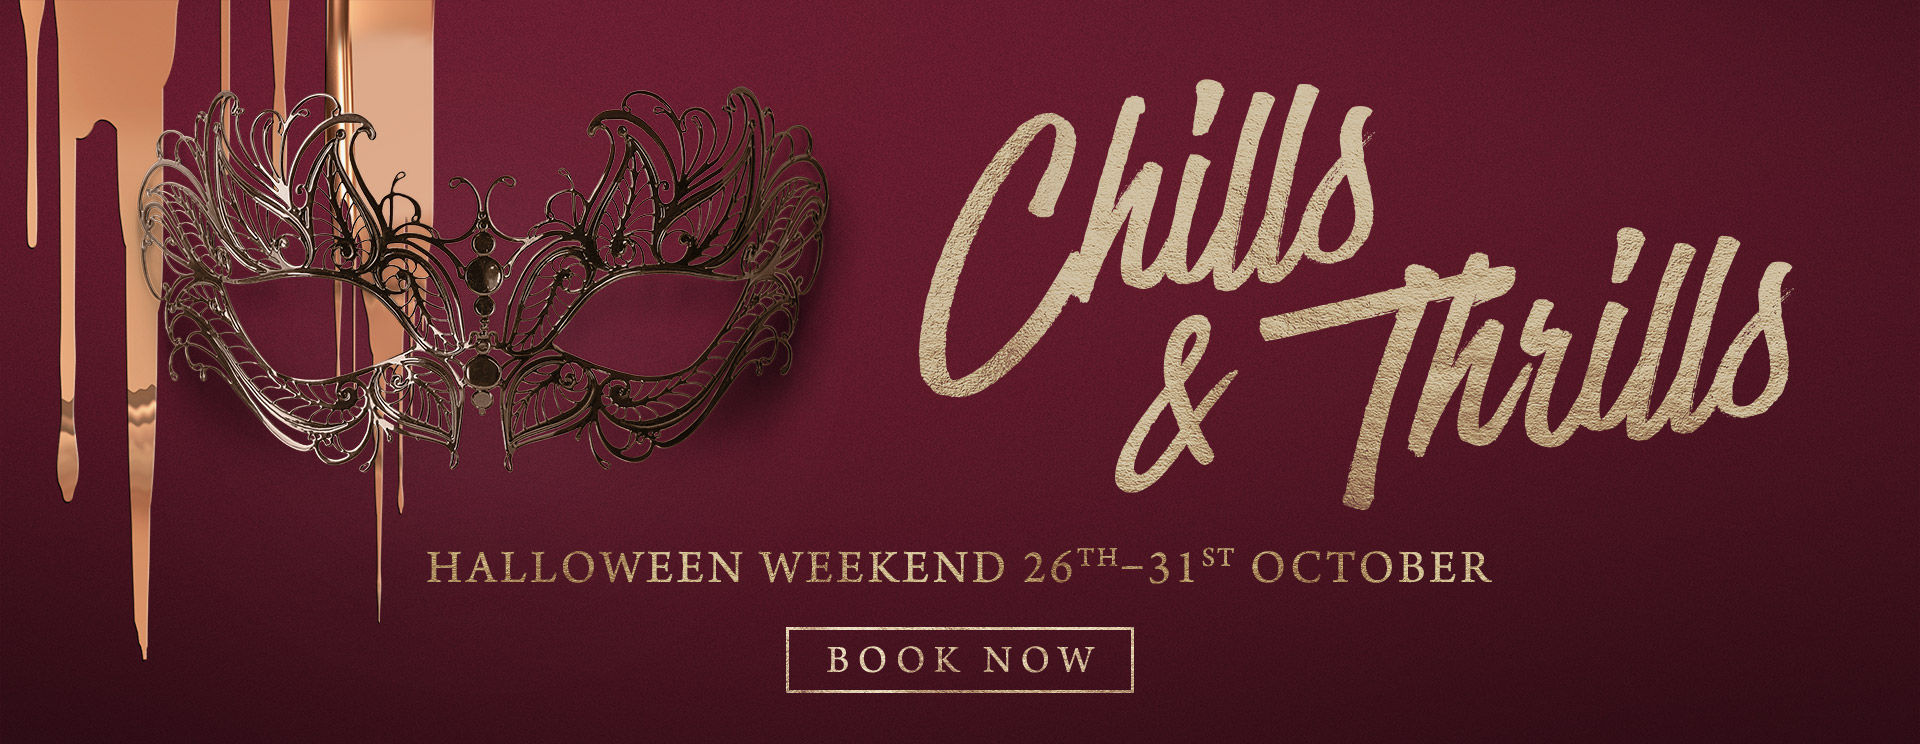 Chills & Thrills this Halloween at The Queen & Castle